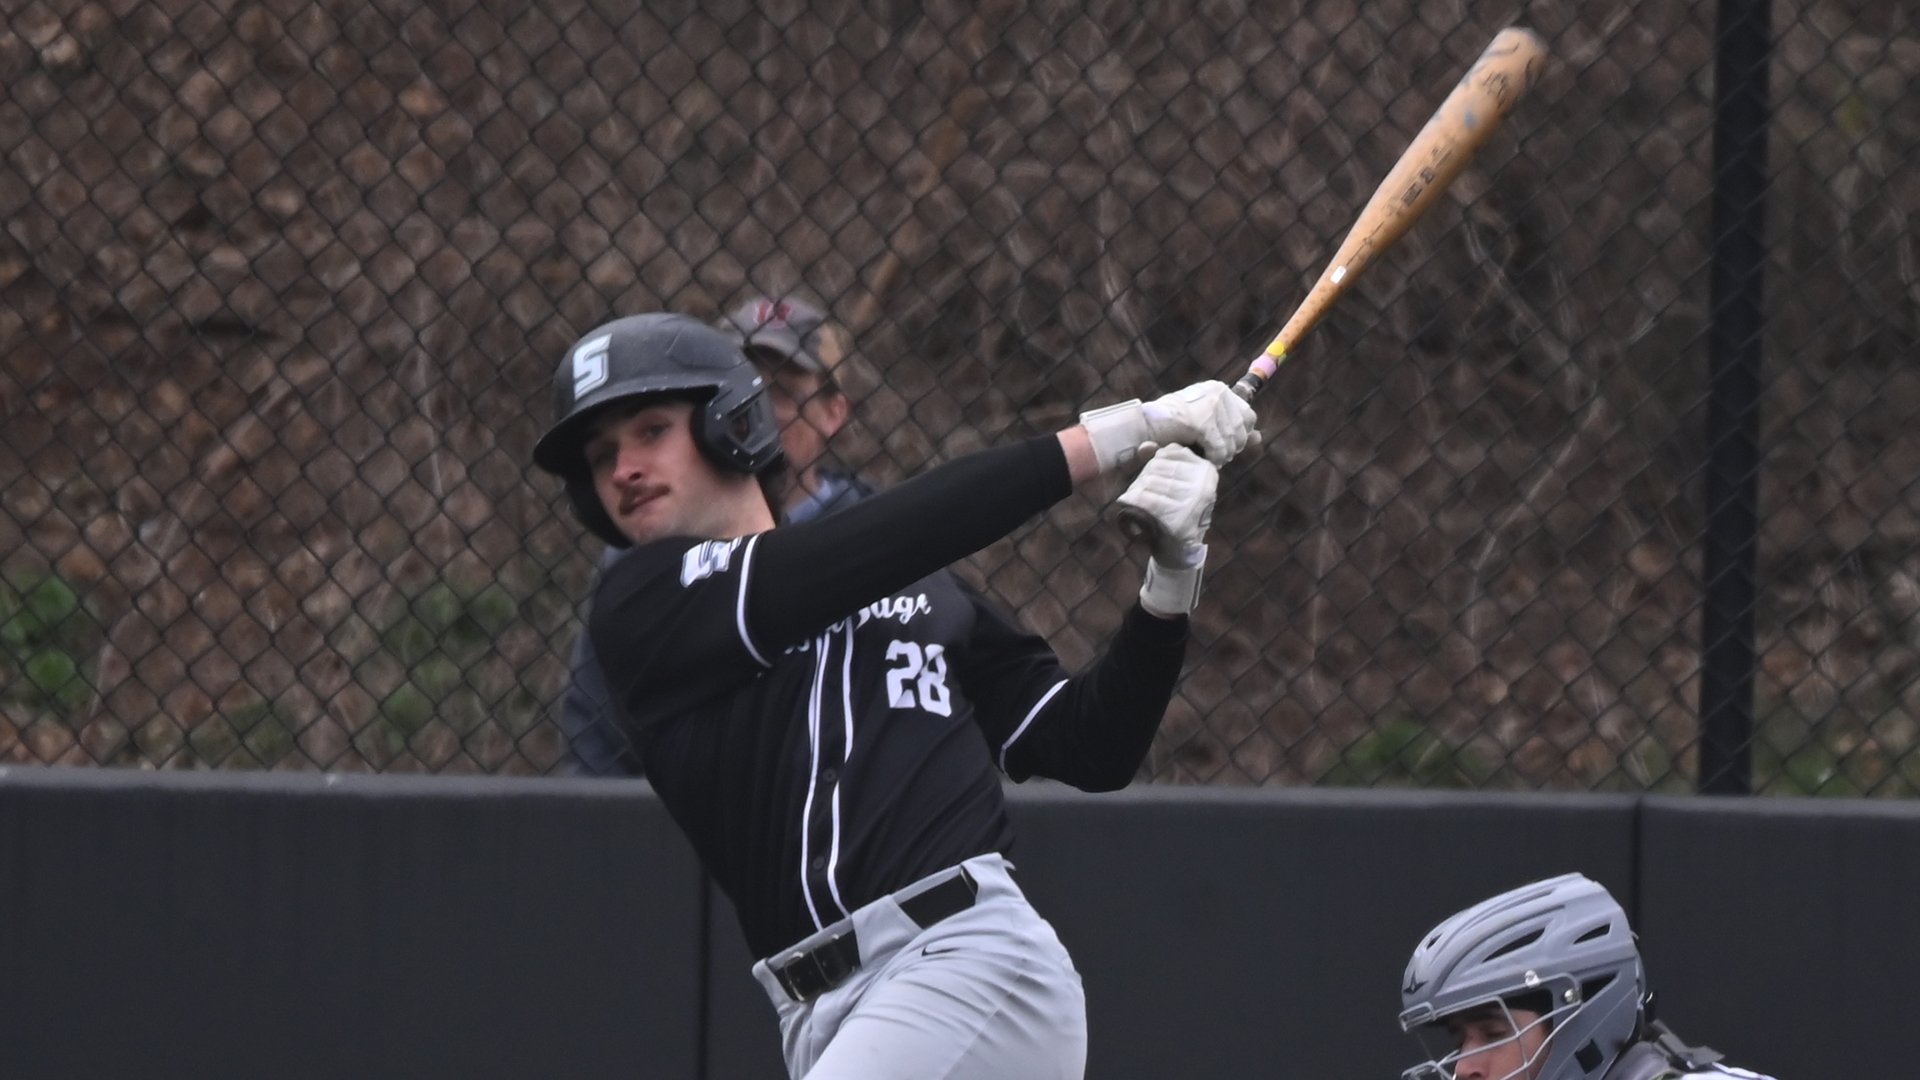 RSC Swept in Saturday Afternoon Doubleheader